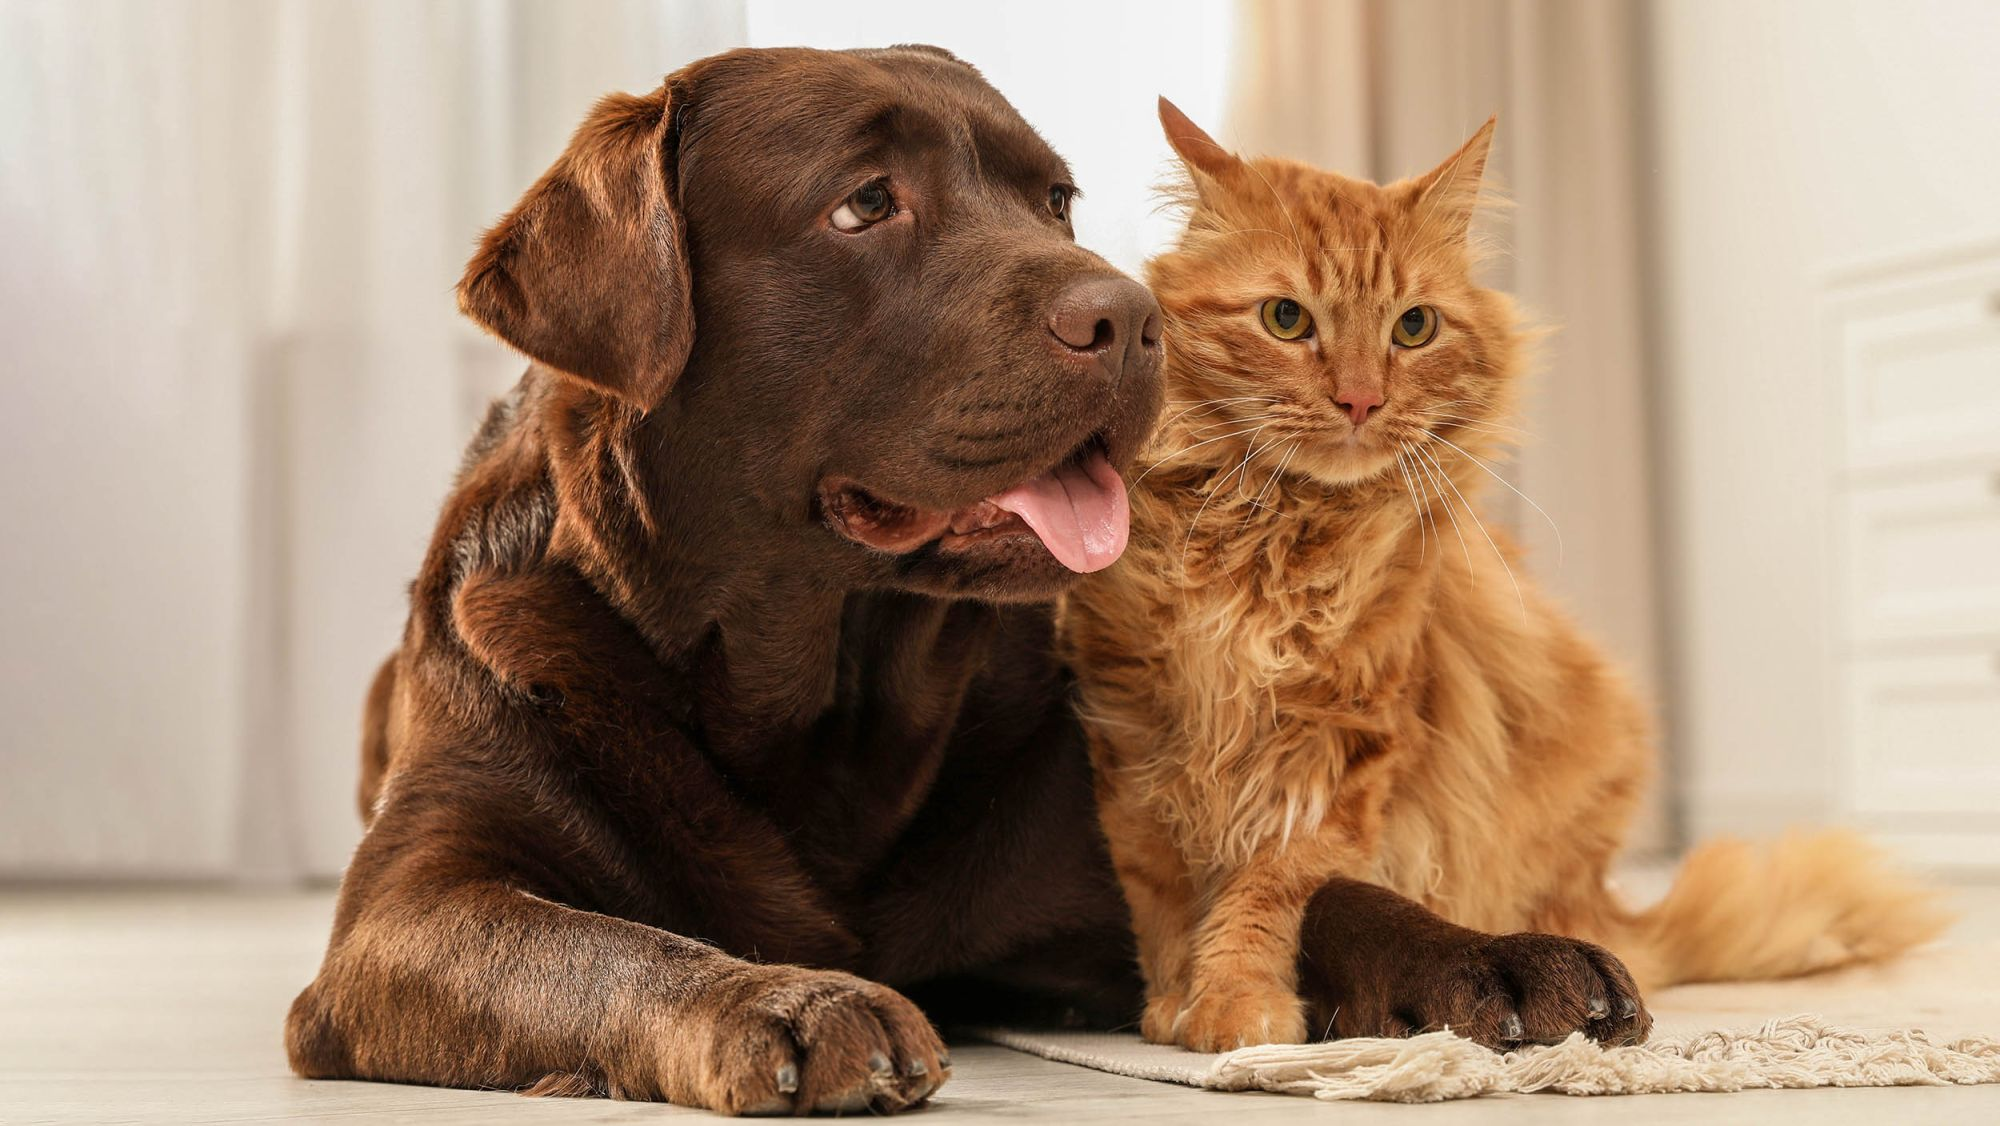 Brown Labrador Retriever and ginger cat lying down